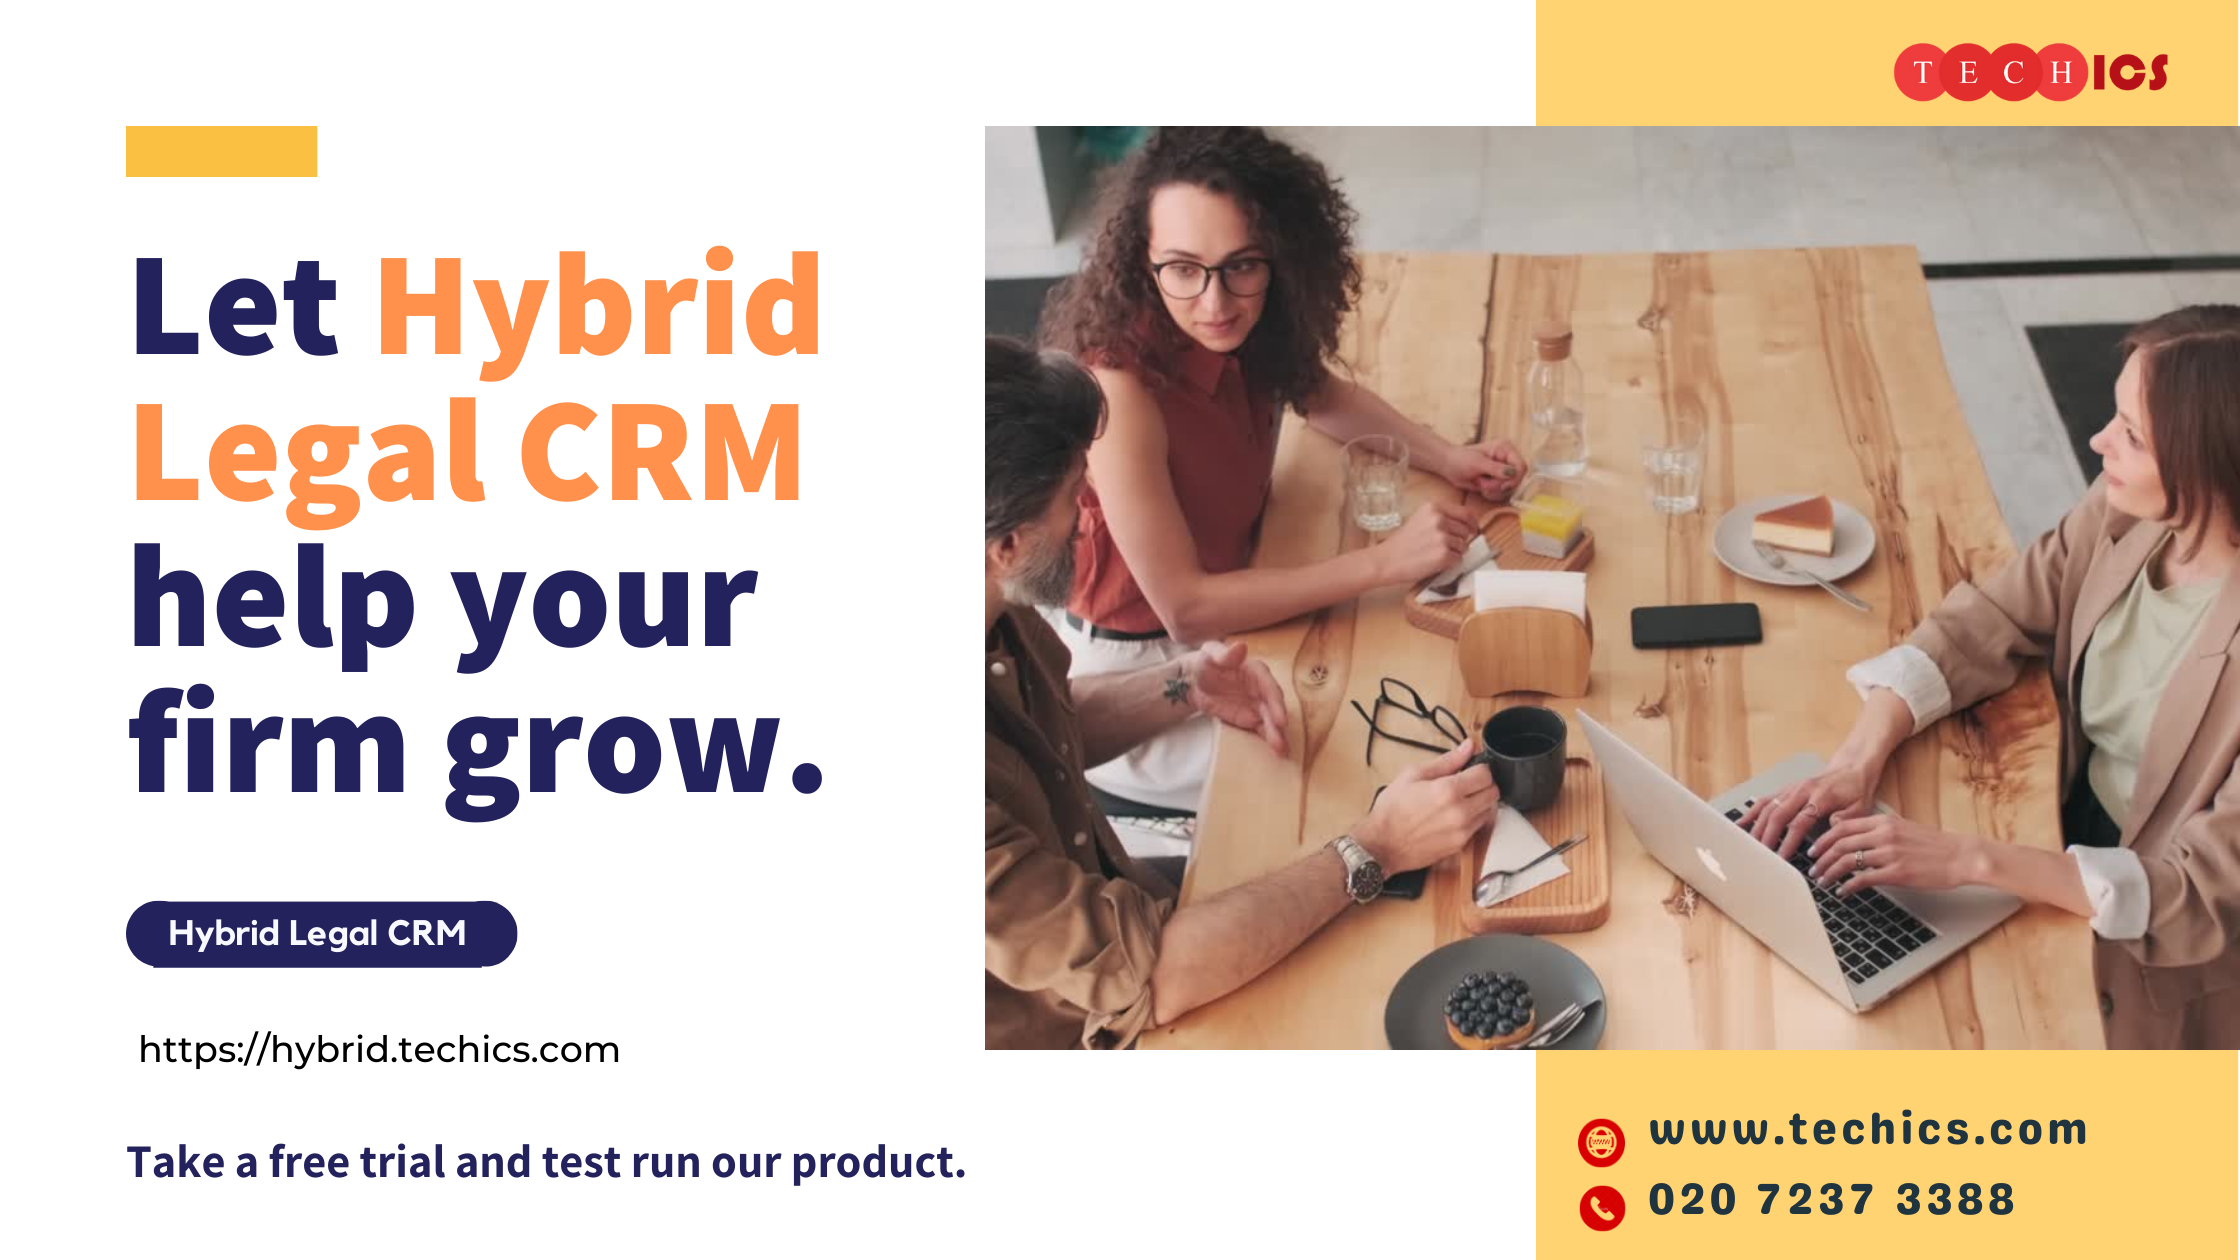 Combining sales & marketing in Hybrid Legal CRM to help grow your law firm